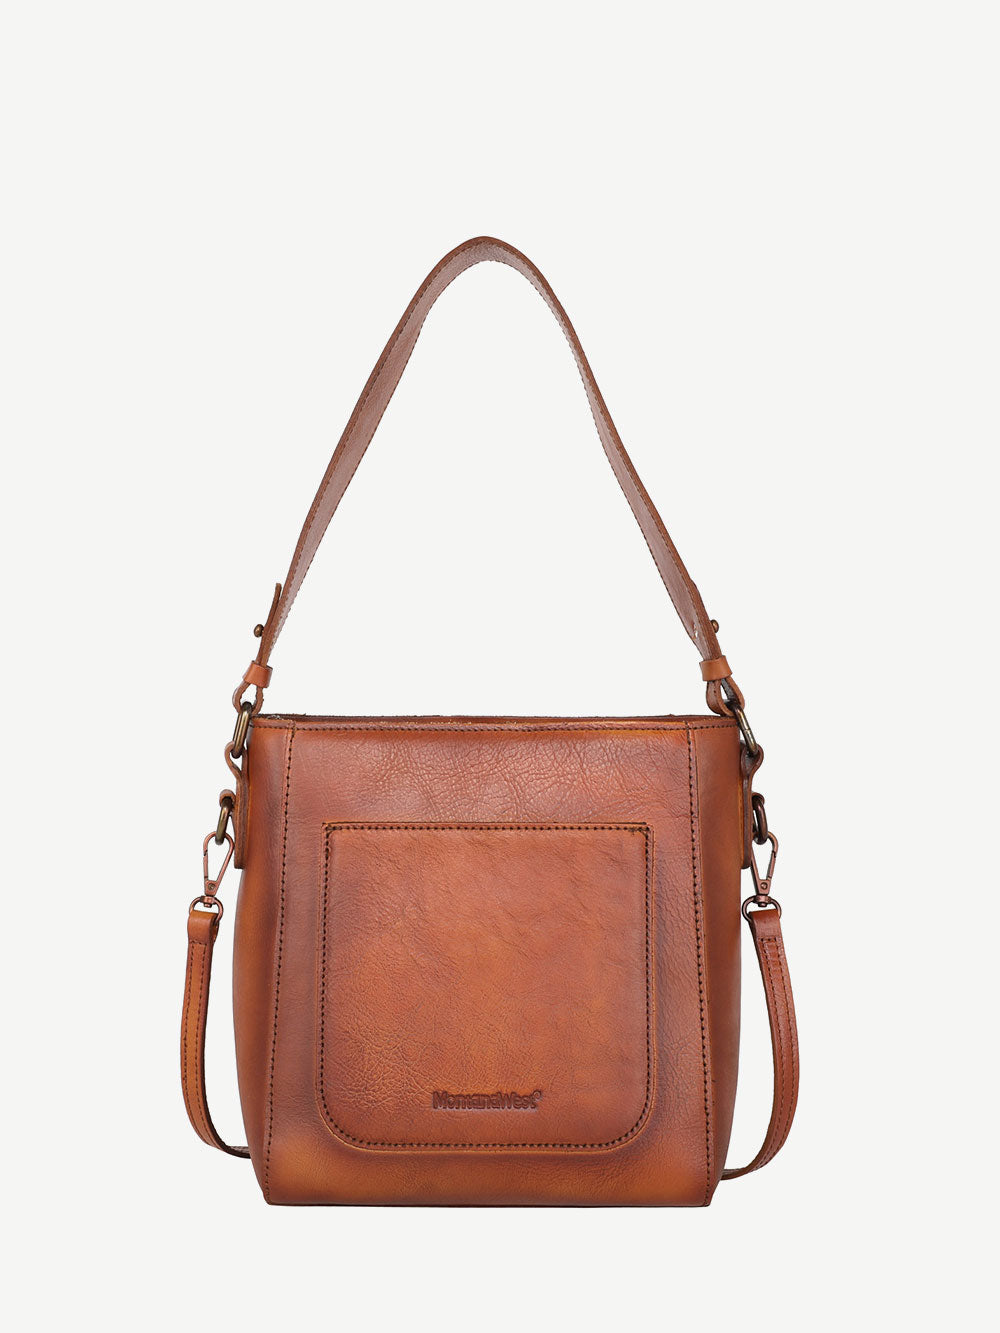 Montana West Genuine Leather Laser Cut-out Crossbody Hobo